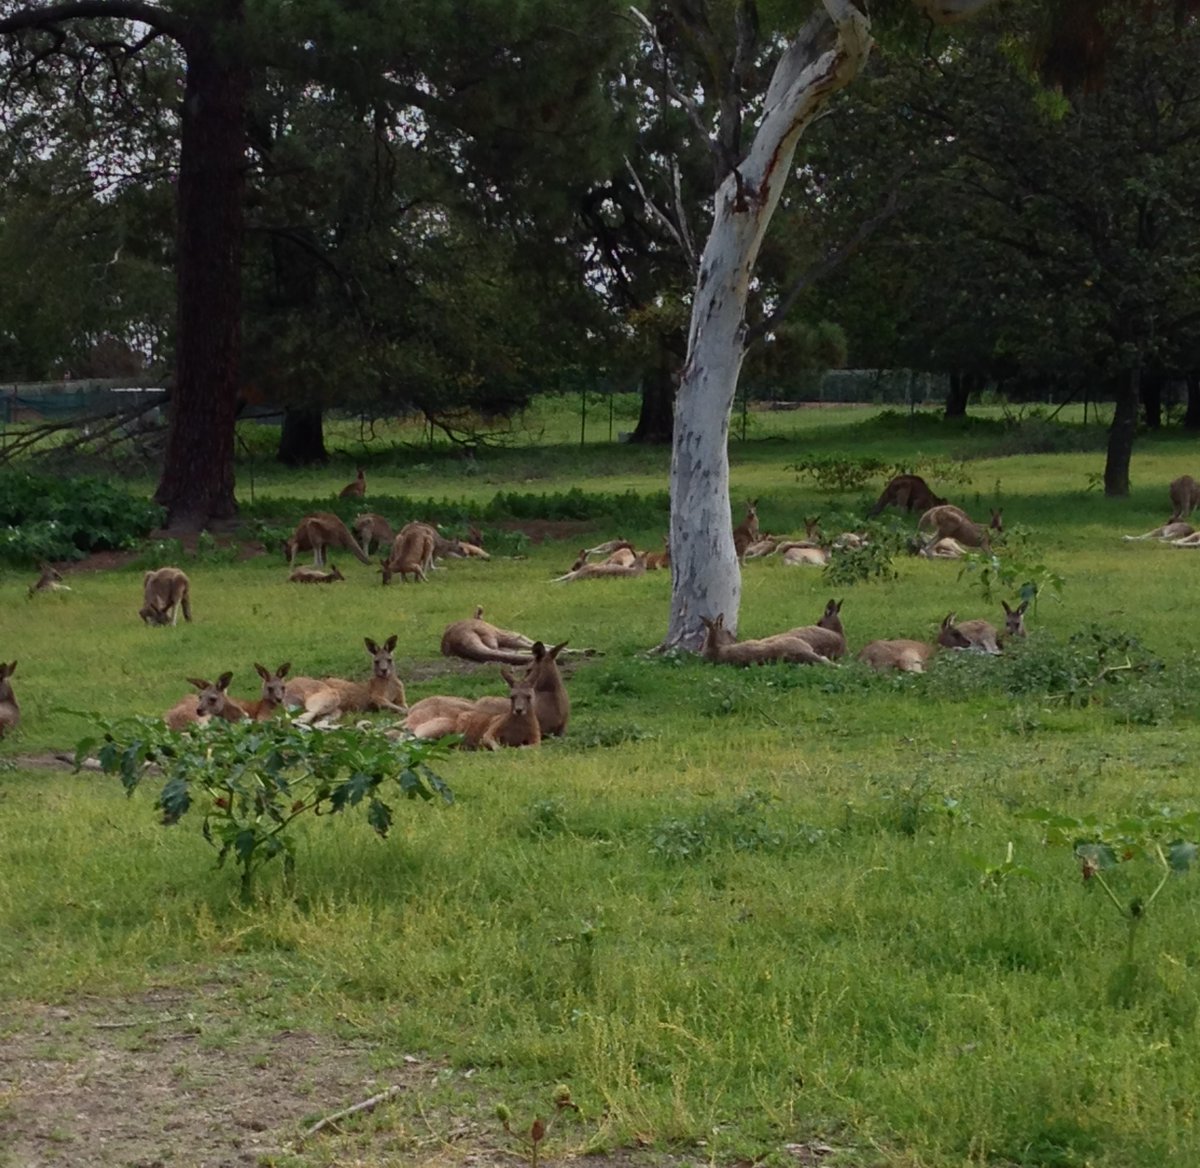 The world can seem like a pretty grim place at the moment.... so here's a picture of the @UniNewEngland's resident kangaroos lounging about at their ease and without a care in the world.